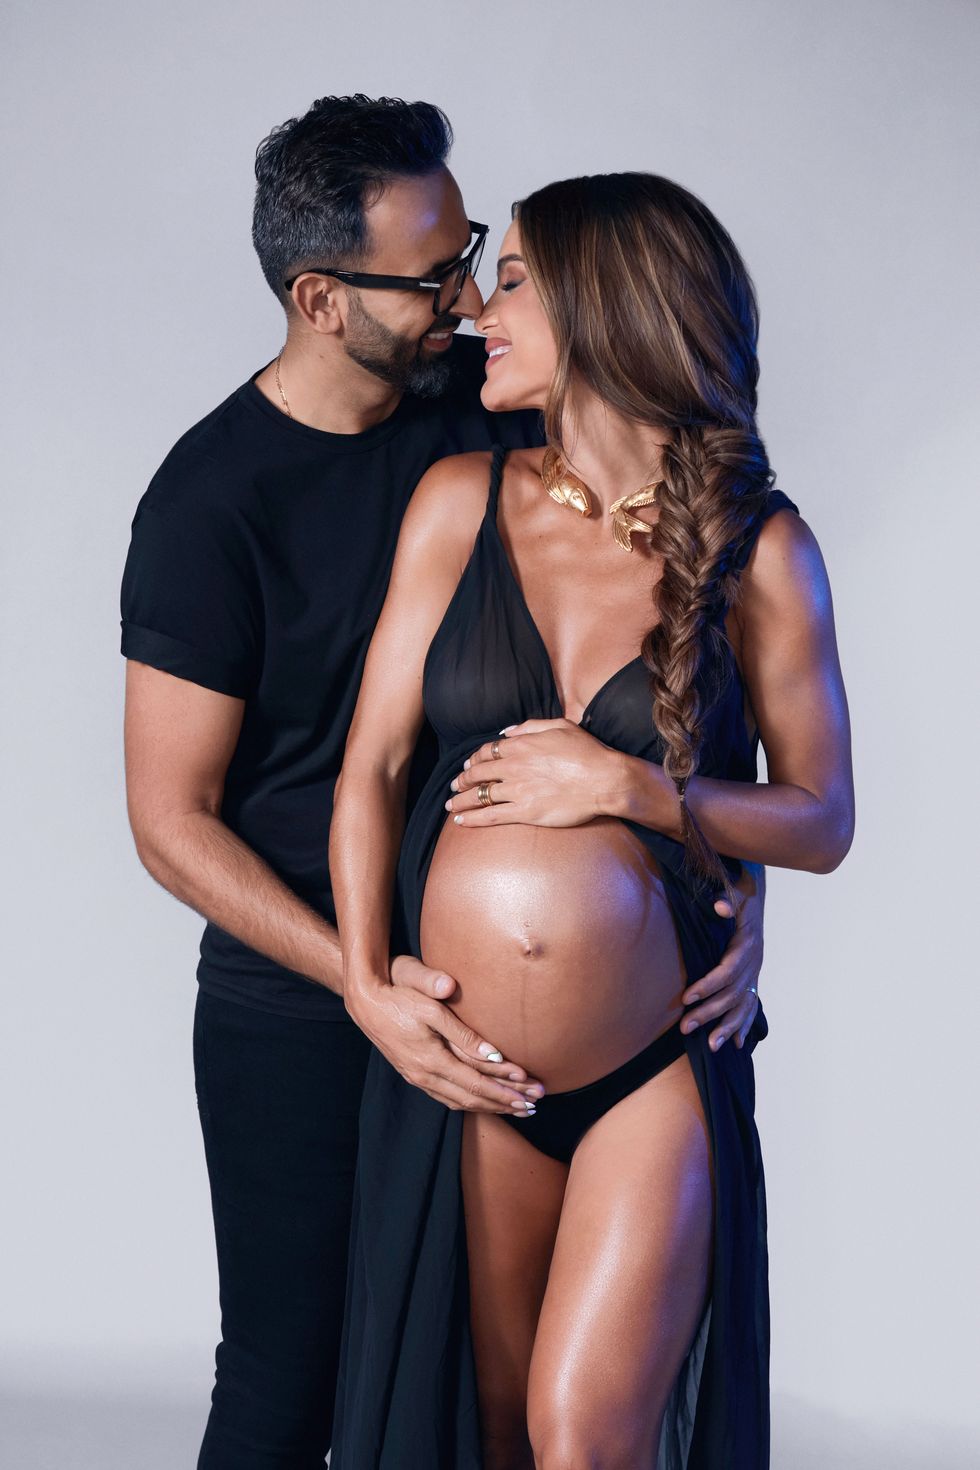 Camila Coelho Shares Her 9-Month Maternity Shoot and Discusses Pregnancy